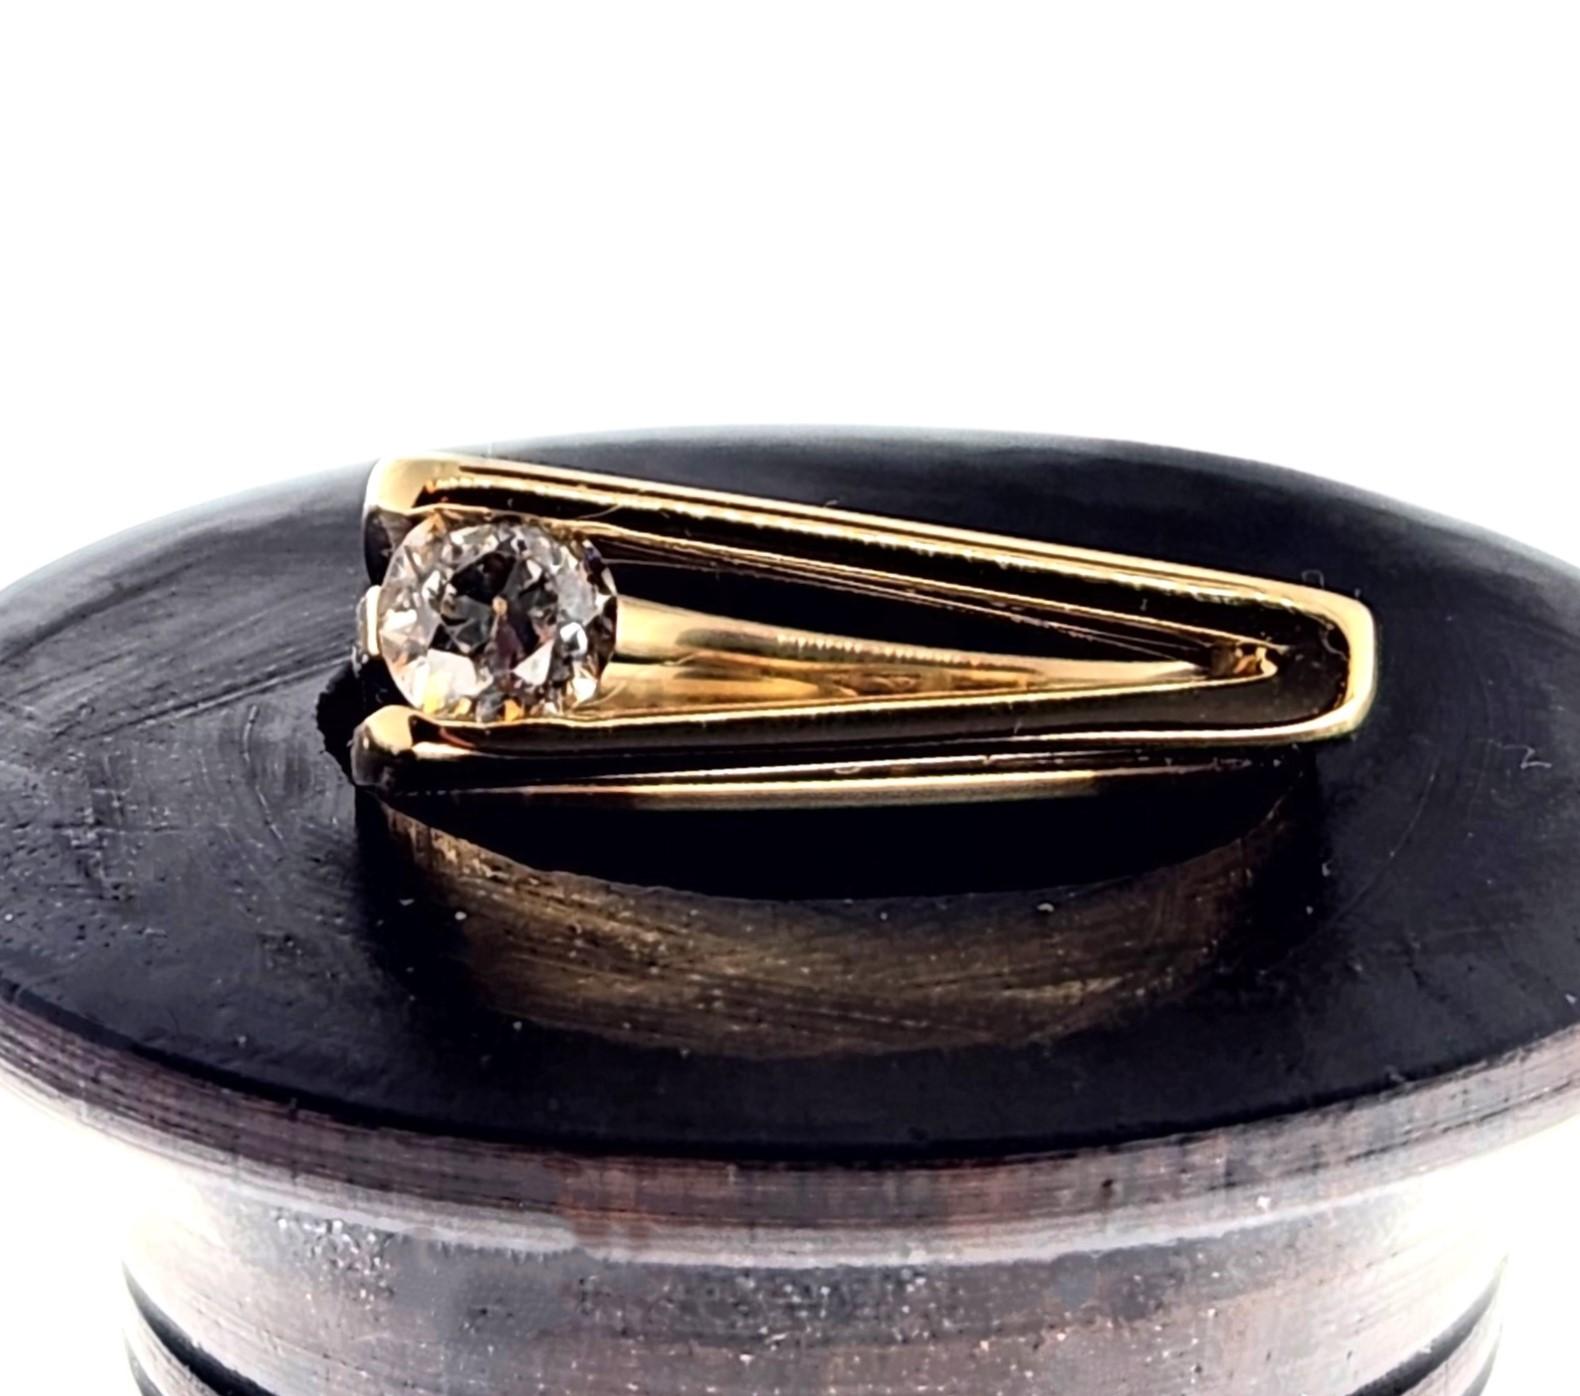 Never designing the same silhouette in her jewelry, Alison Nagasue created a new ring profile and used an old miner cut diamond which has an elegant characteristic.  One side of the ring has 3 